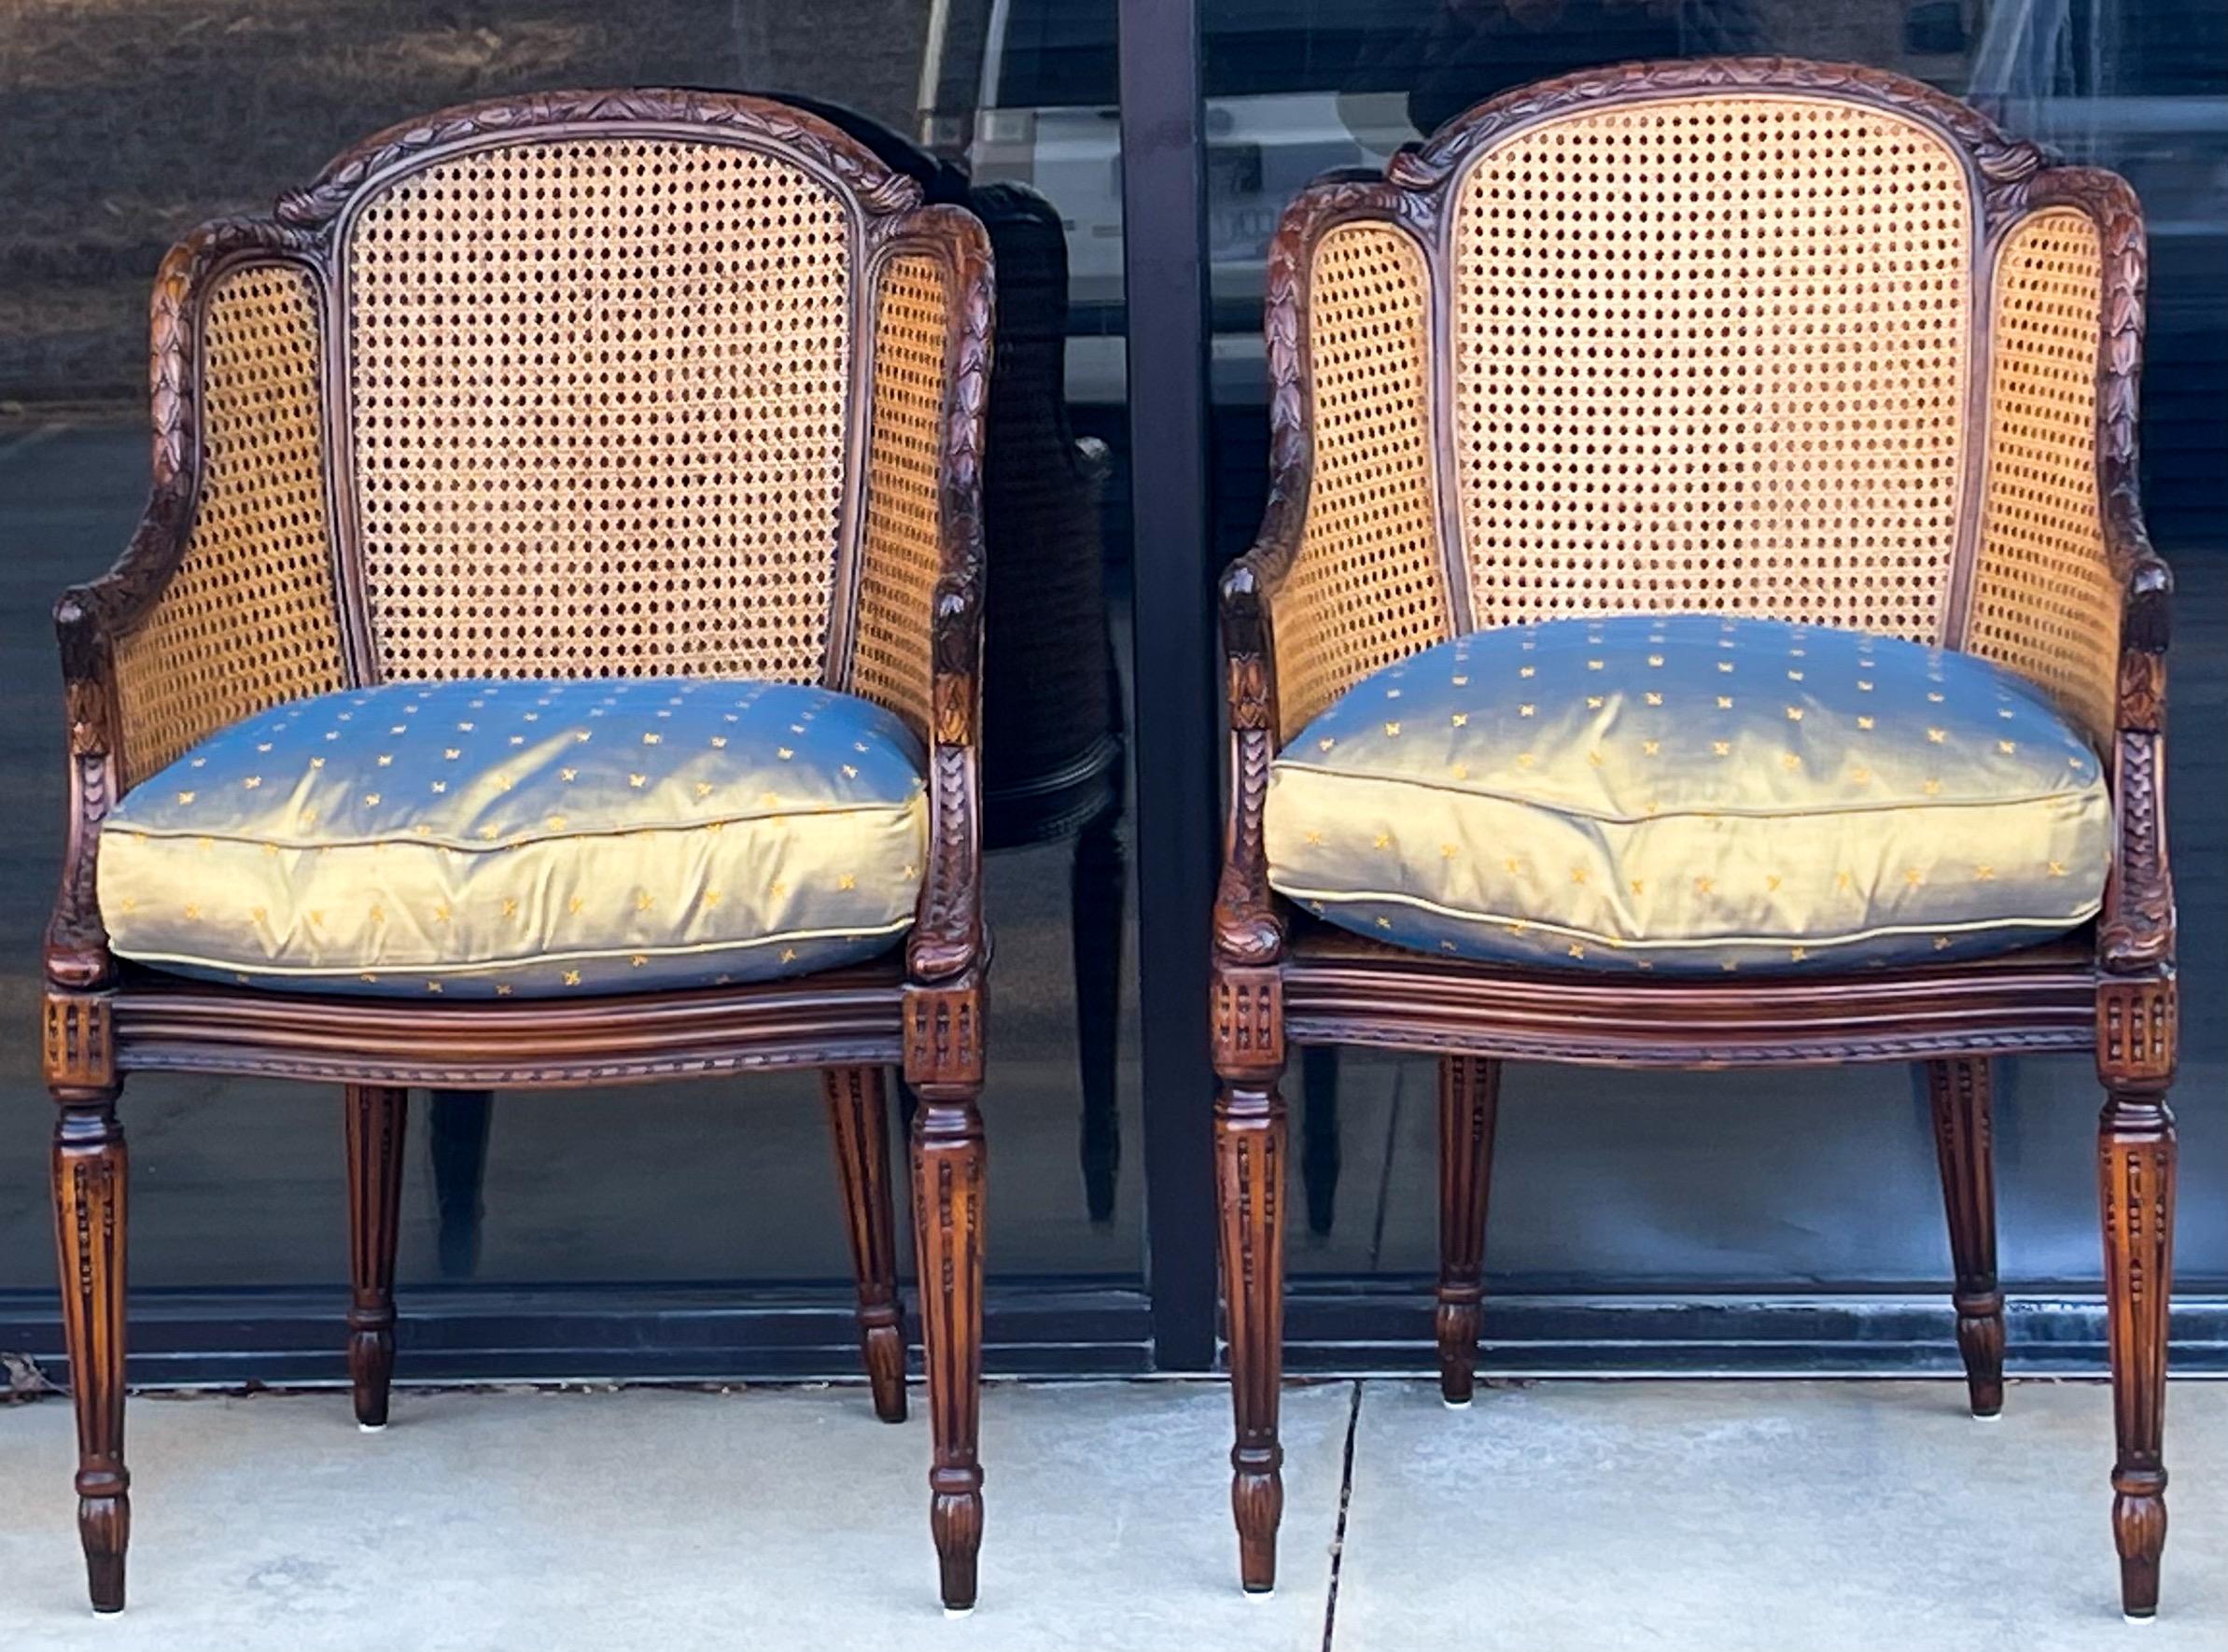 These lovely double cane French style chairs are by Maitland-Smith. The are in very good condition and have a loose down cushion wrapped in embroidered silk. They are marked. There is one mark on one cushion but the opposite side is fine. The carved